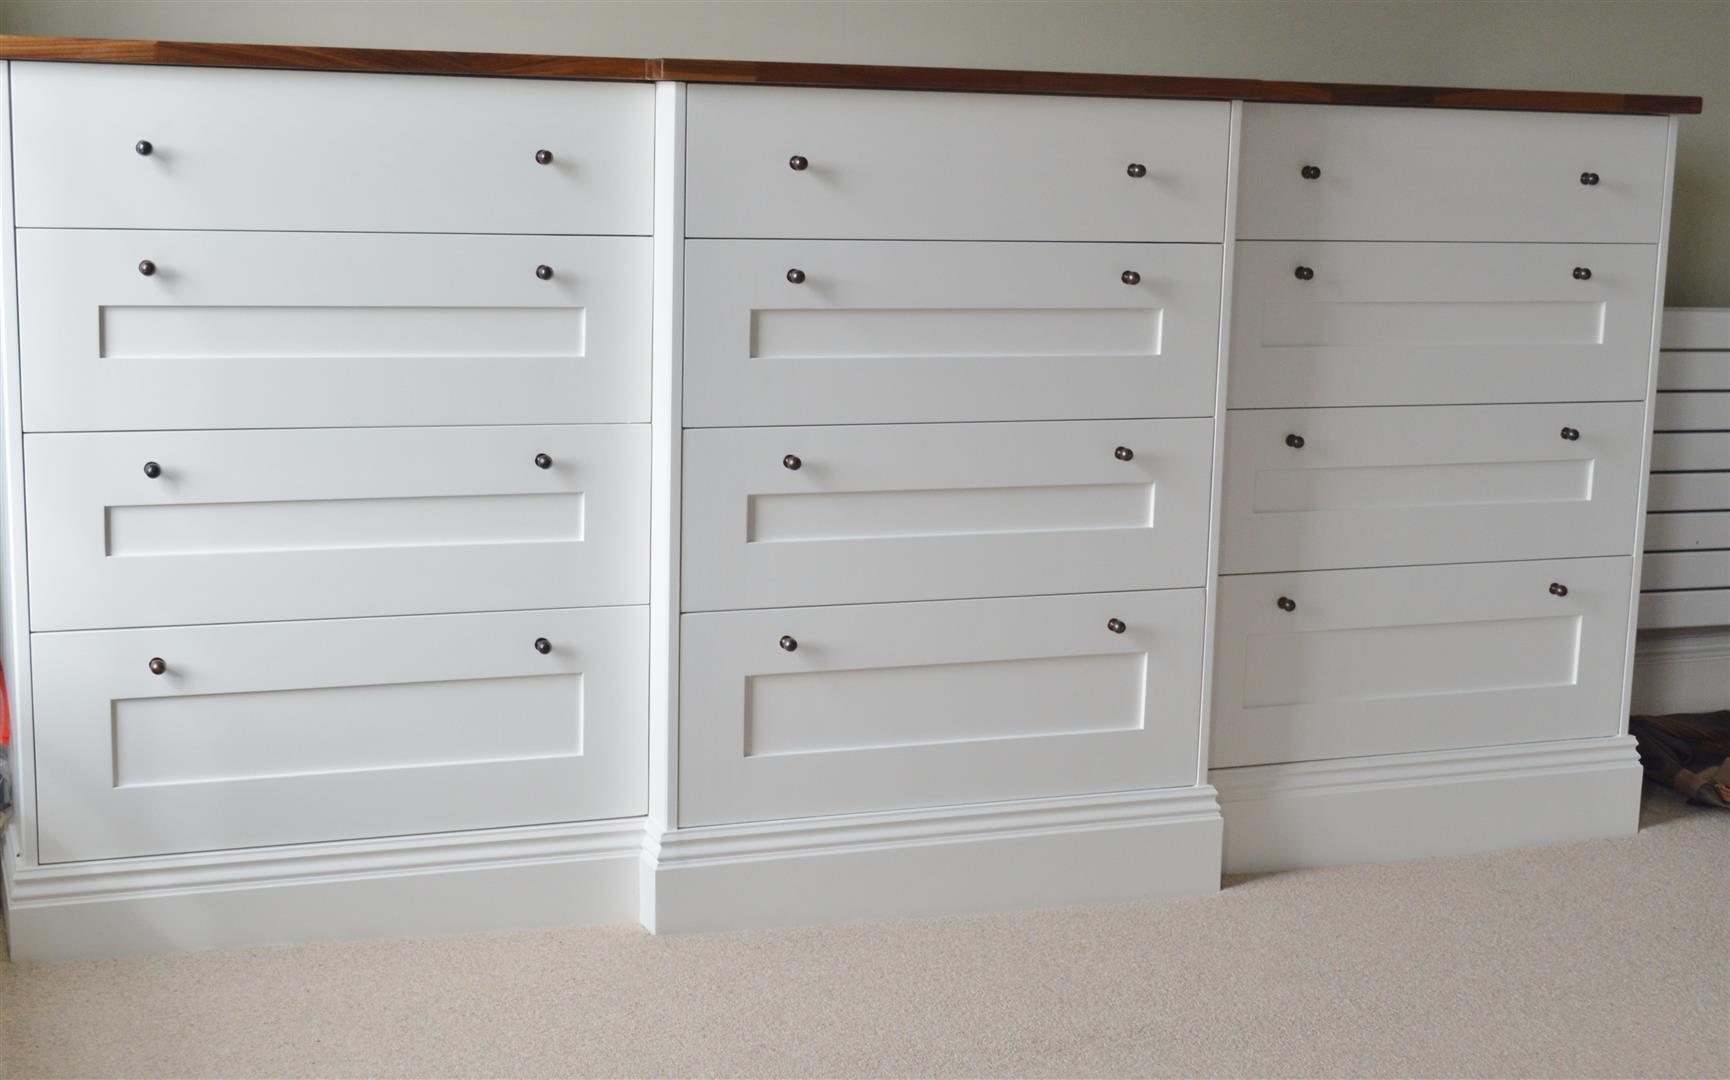 This long bank of drawers will provide a large amount of easy access storage. The disjointed line provides a nice feature to break up the line.